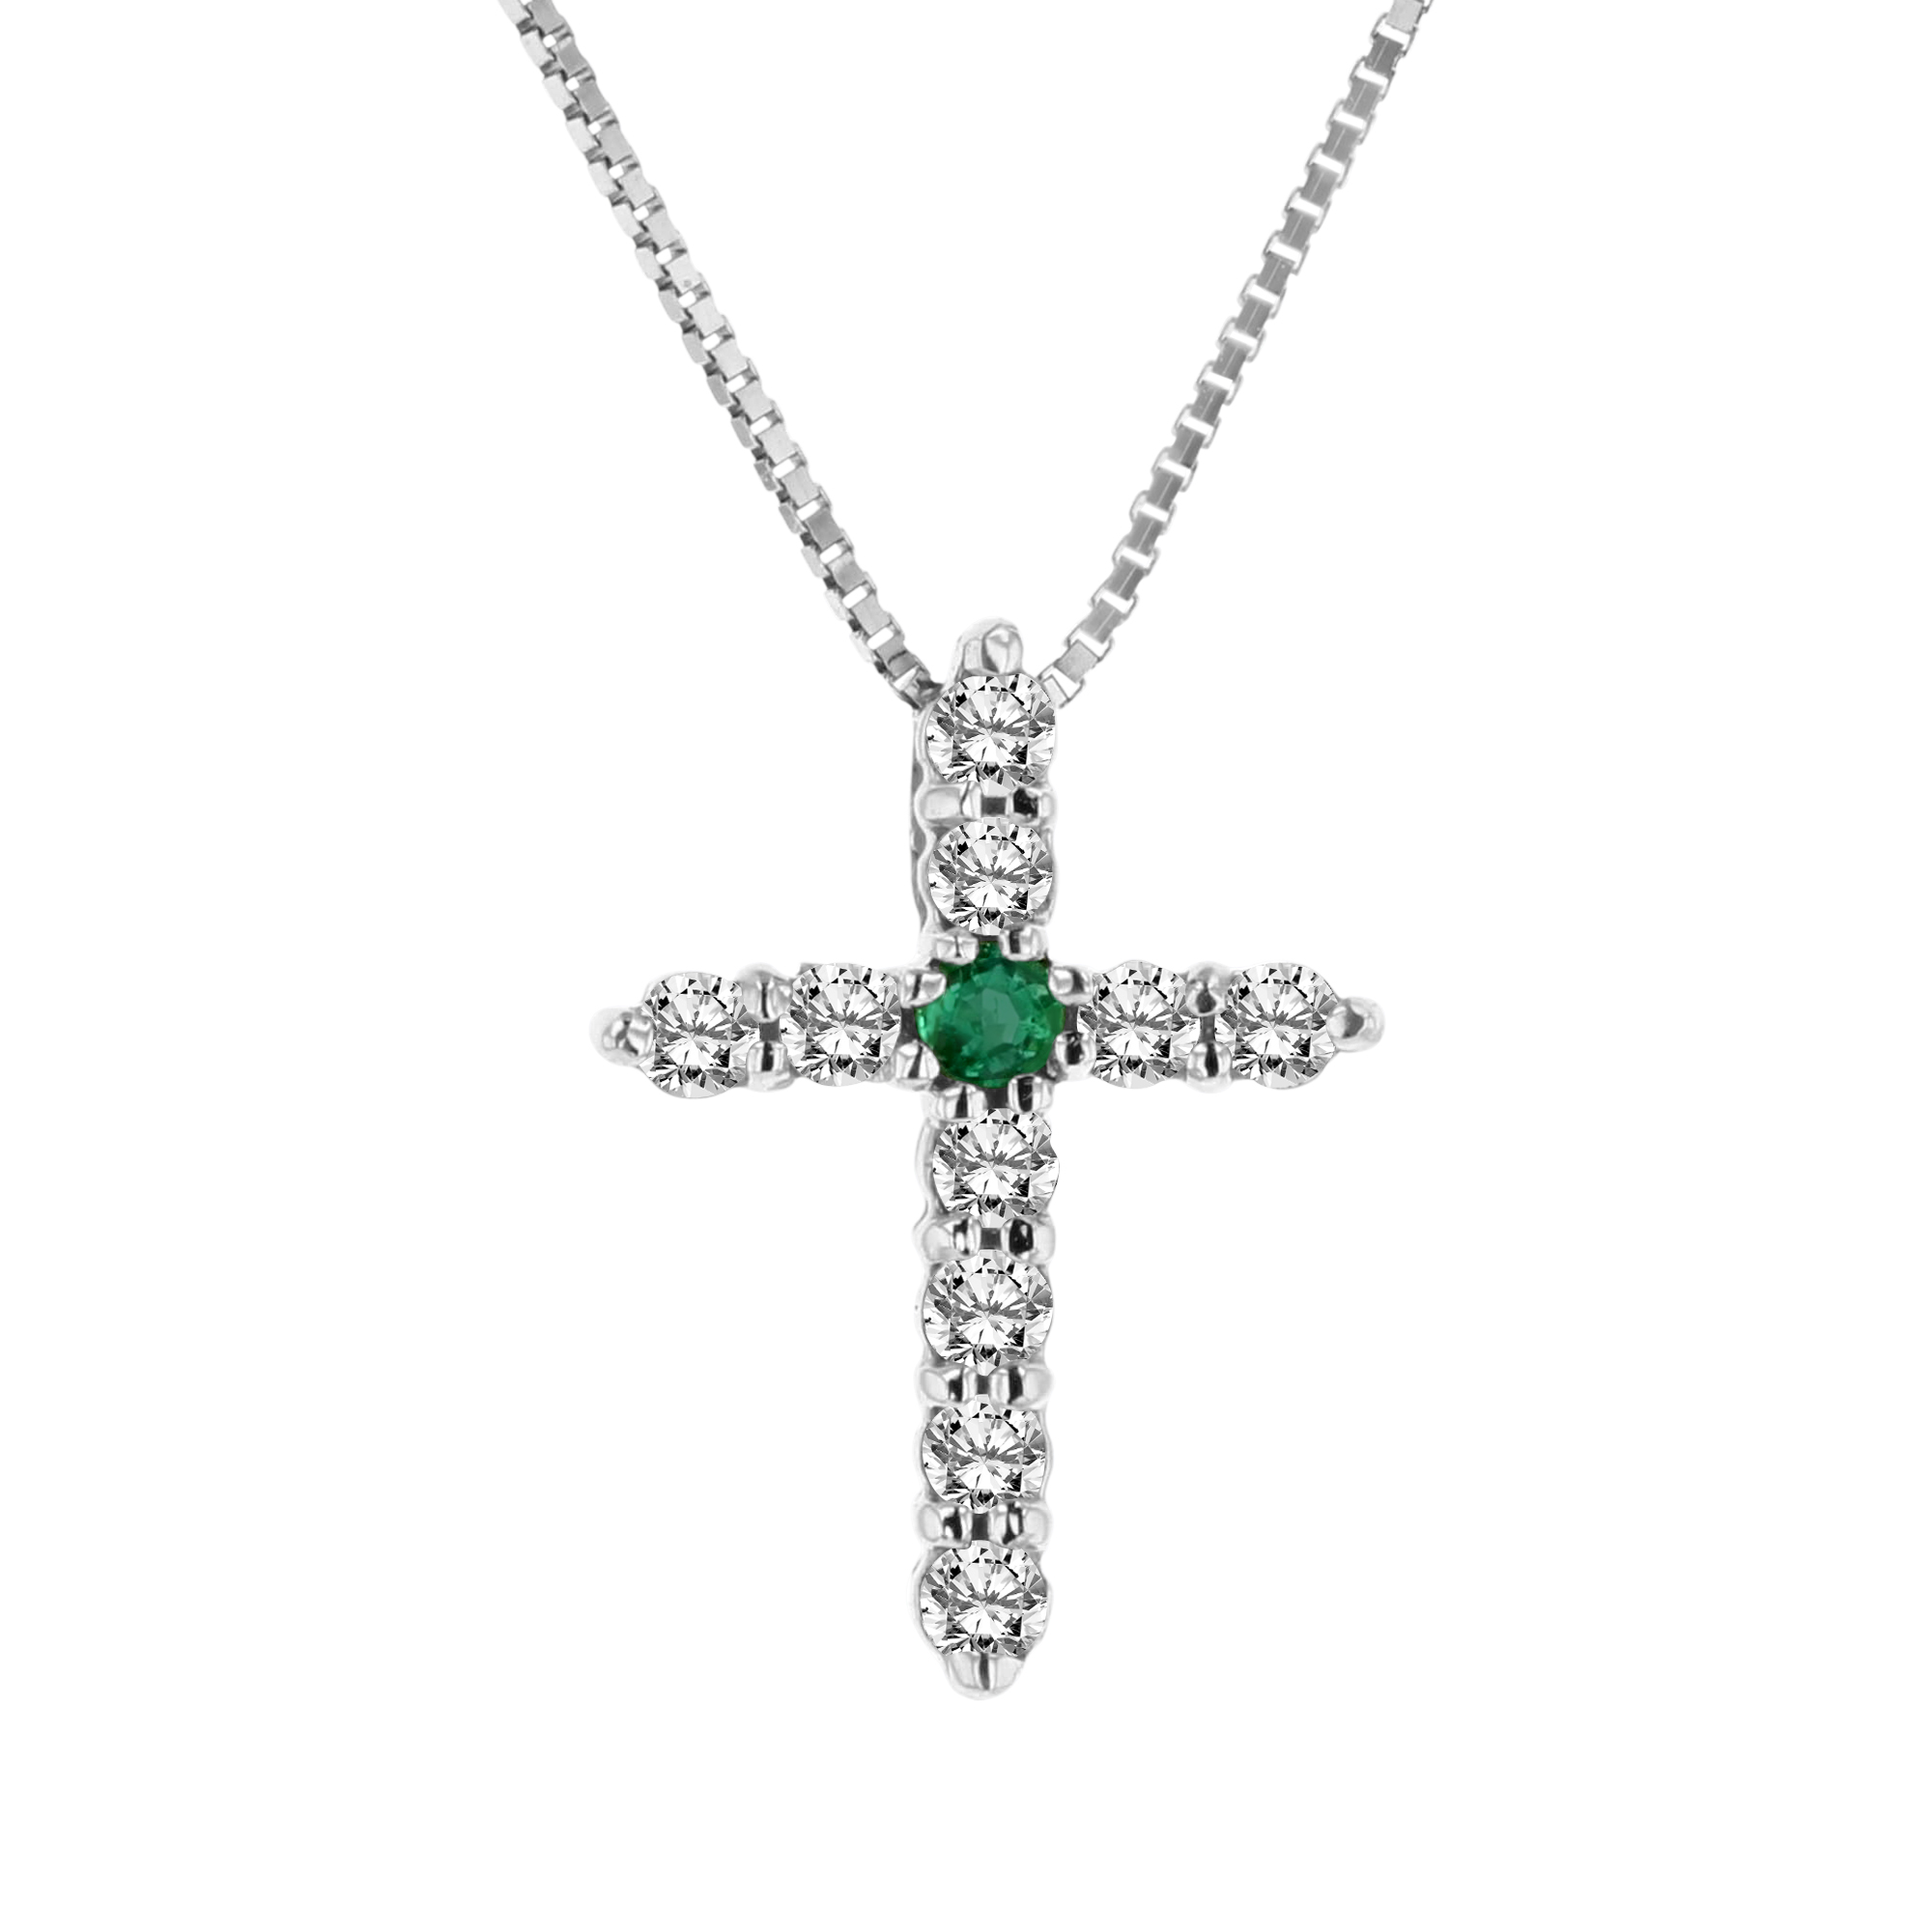 View 0.18ctw Emerald and Diamond Cross Pendant in 14k White Gold